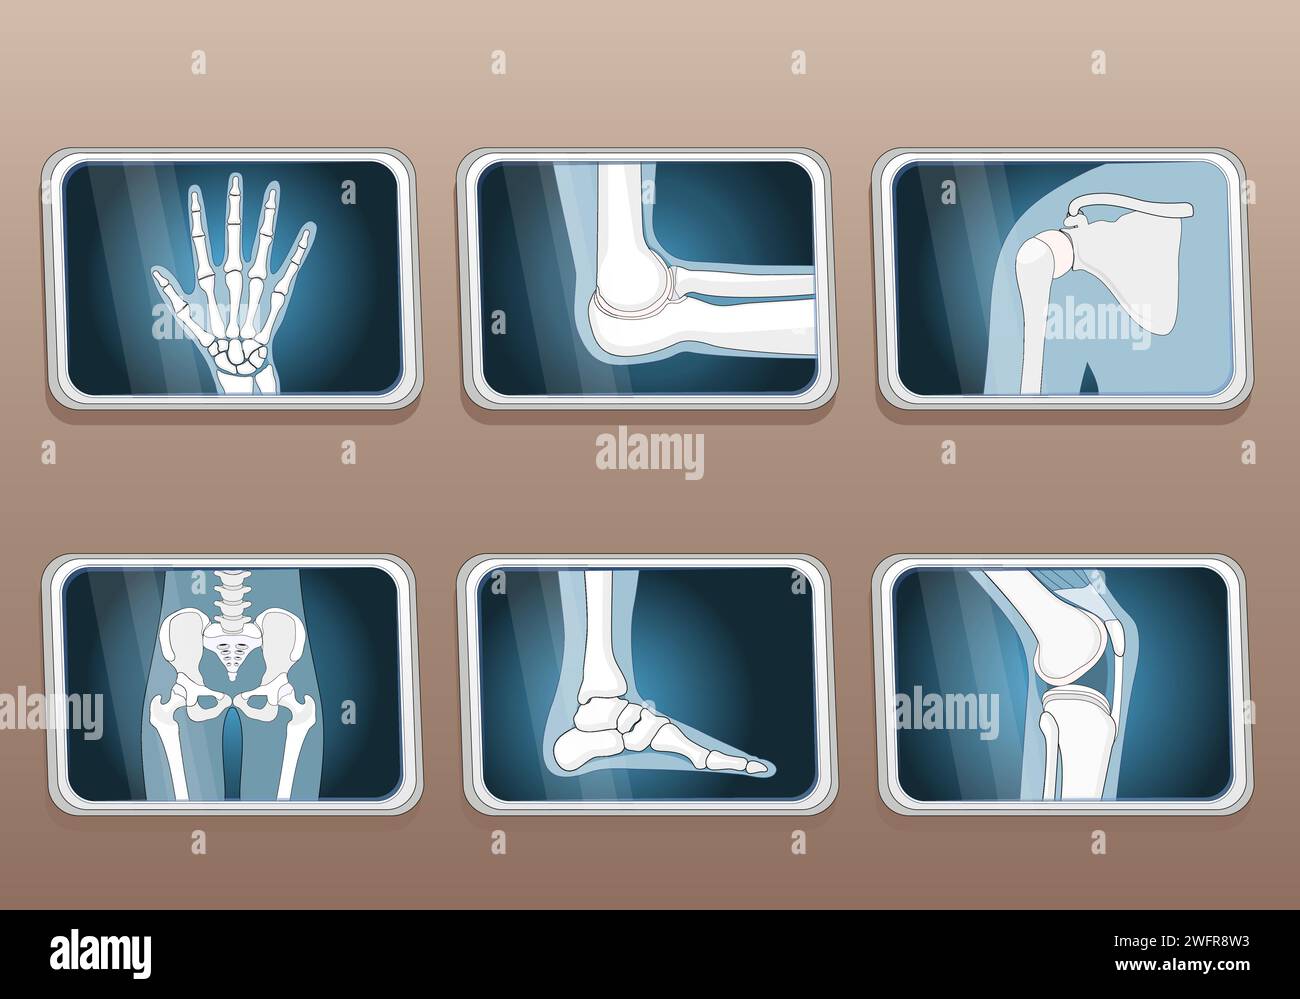 Types of joints. Knee, Elbow, wrist, hip, shoulder joints and Articulations of foot. Set icons. X-ray image. Isometric Flat vector illustration. Stock Vector